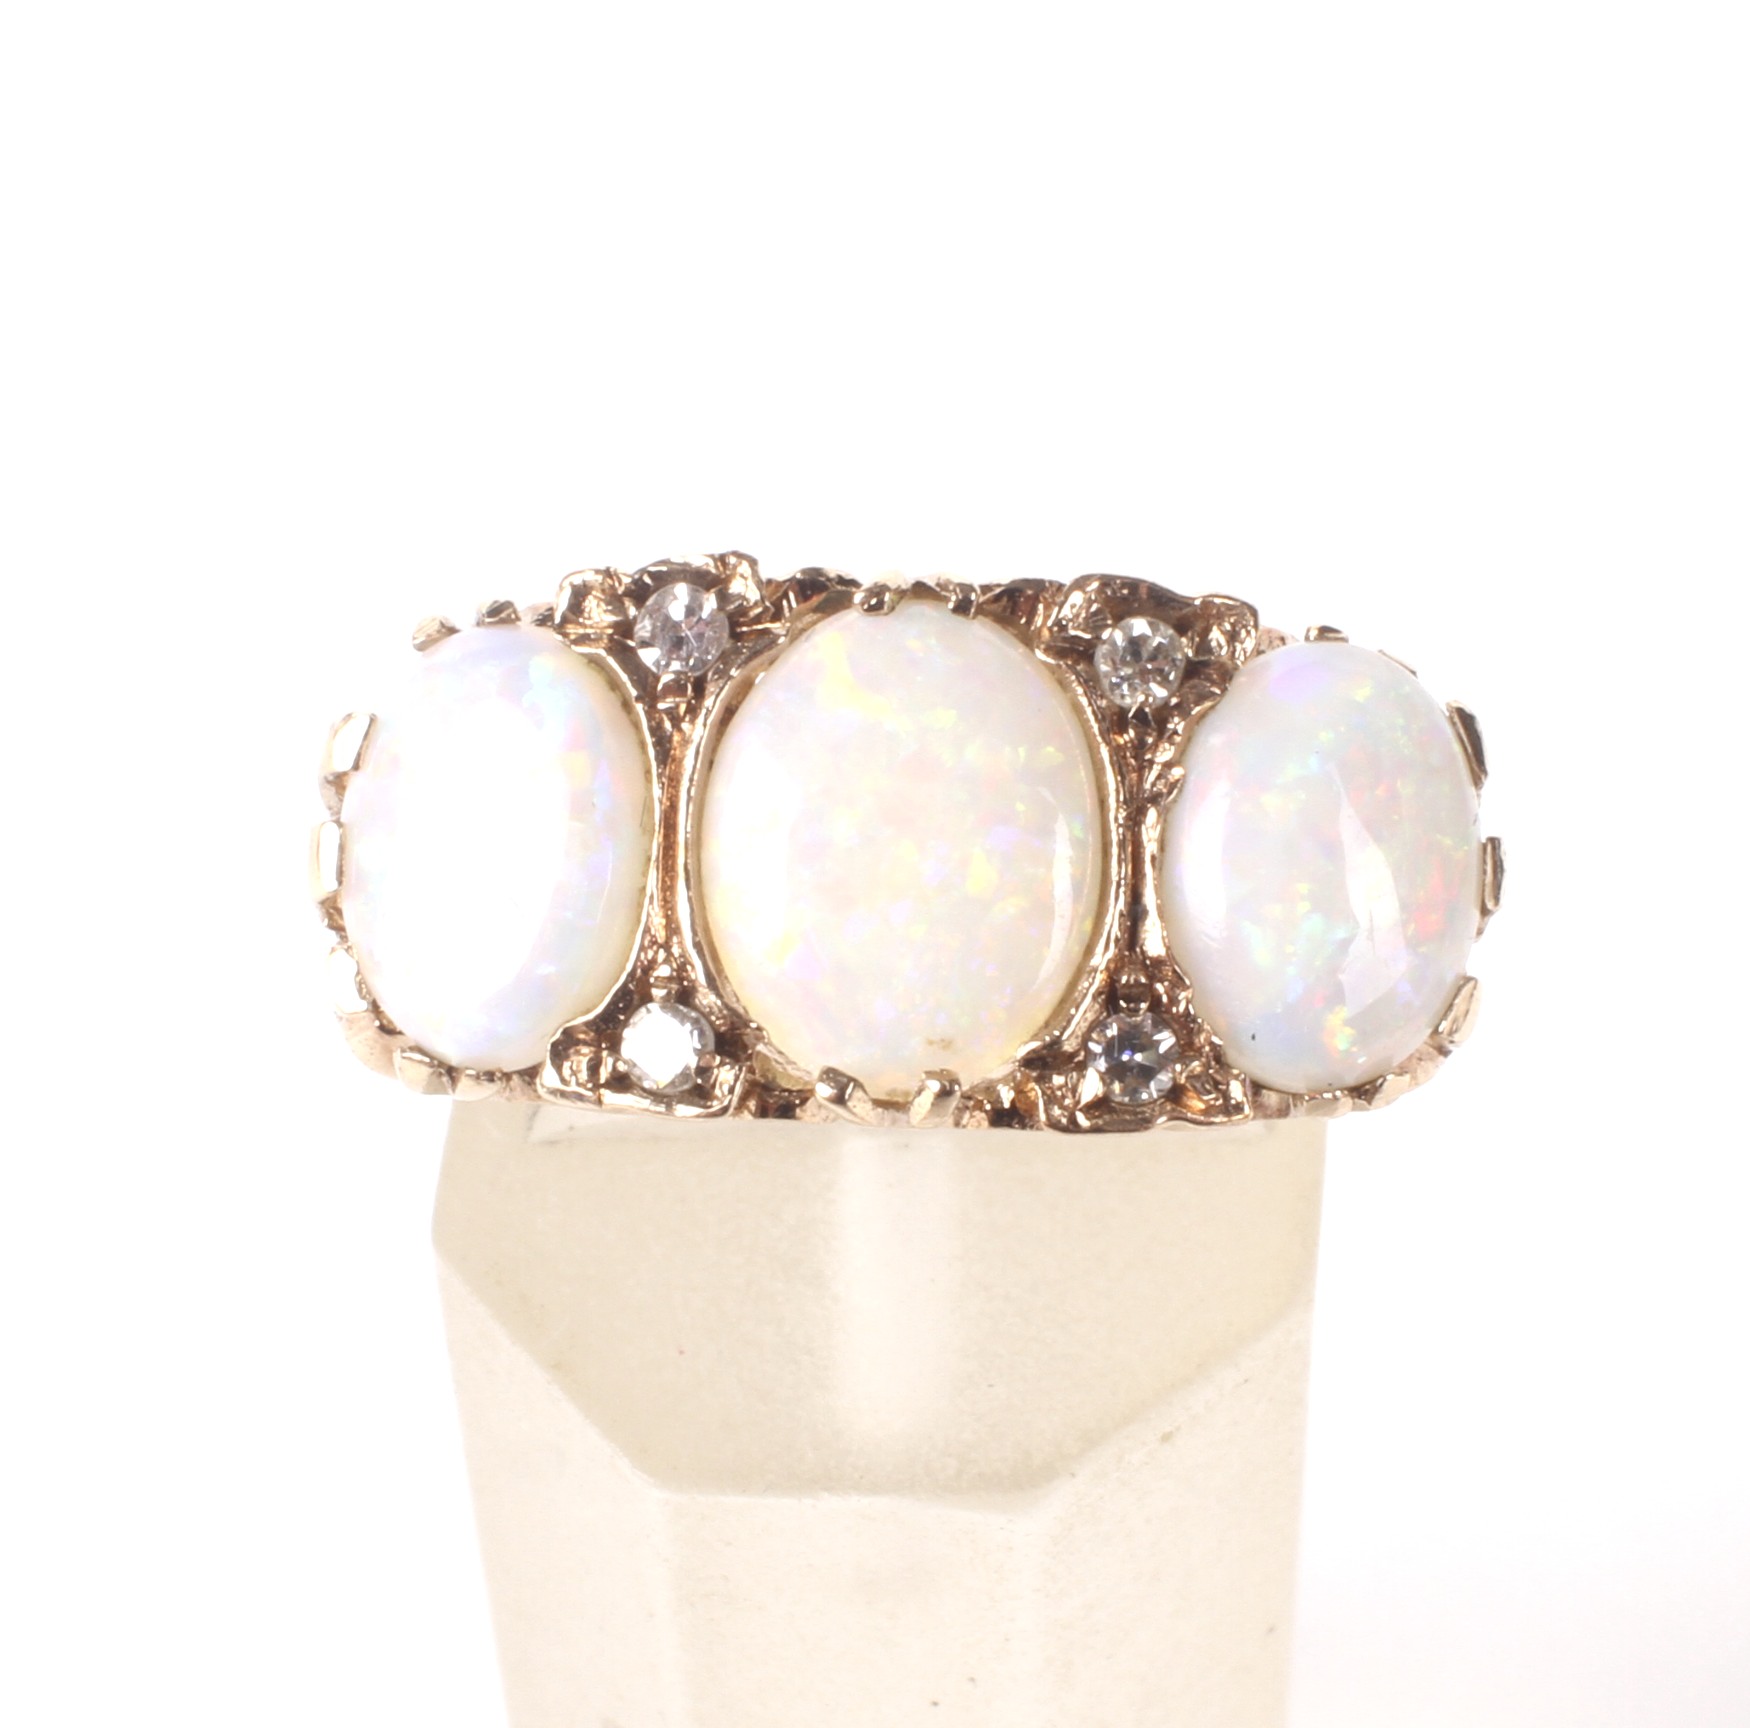 A vintage 9ct gold, opal and diamond carved half-hoop ring. - Image 2 of 4